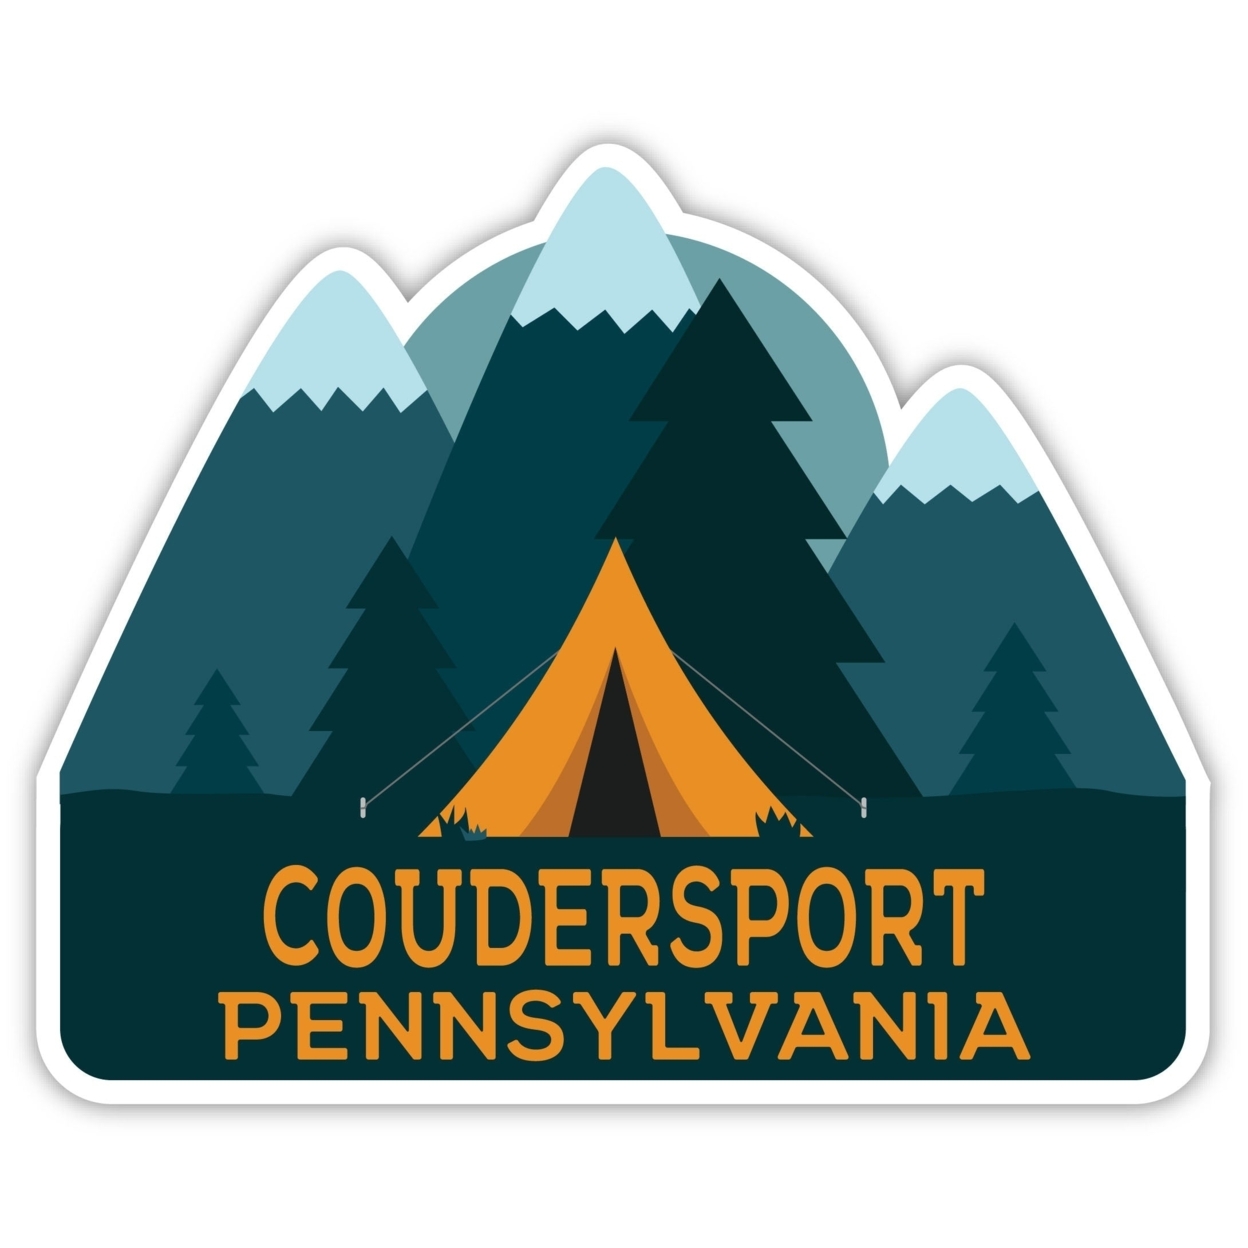 Coudersport Pennsylvania Souvenir Decorative Stickers (Choose Theme And Size) - 4-Pack, 10-Inch, Tent